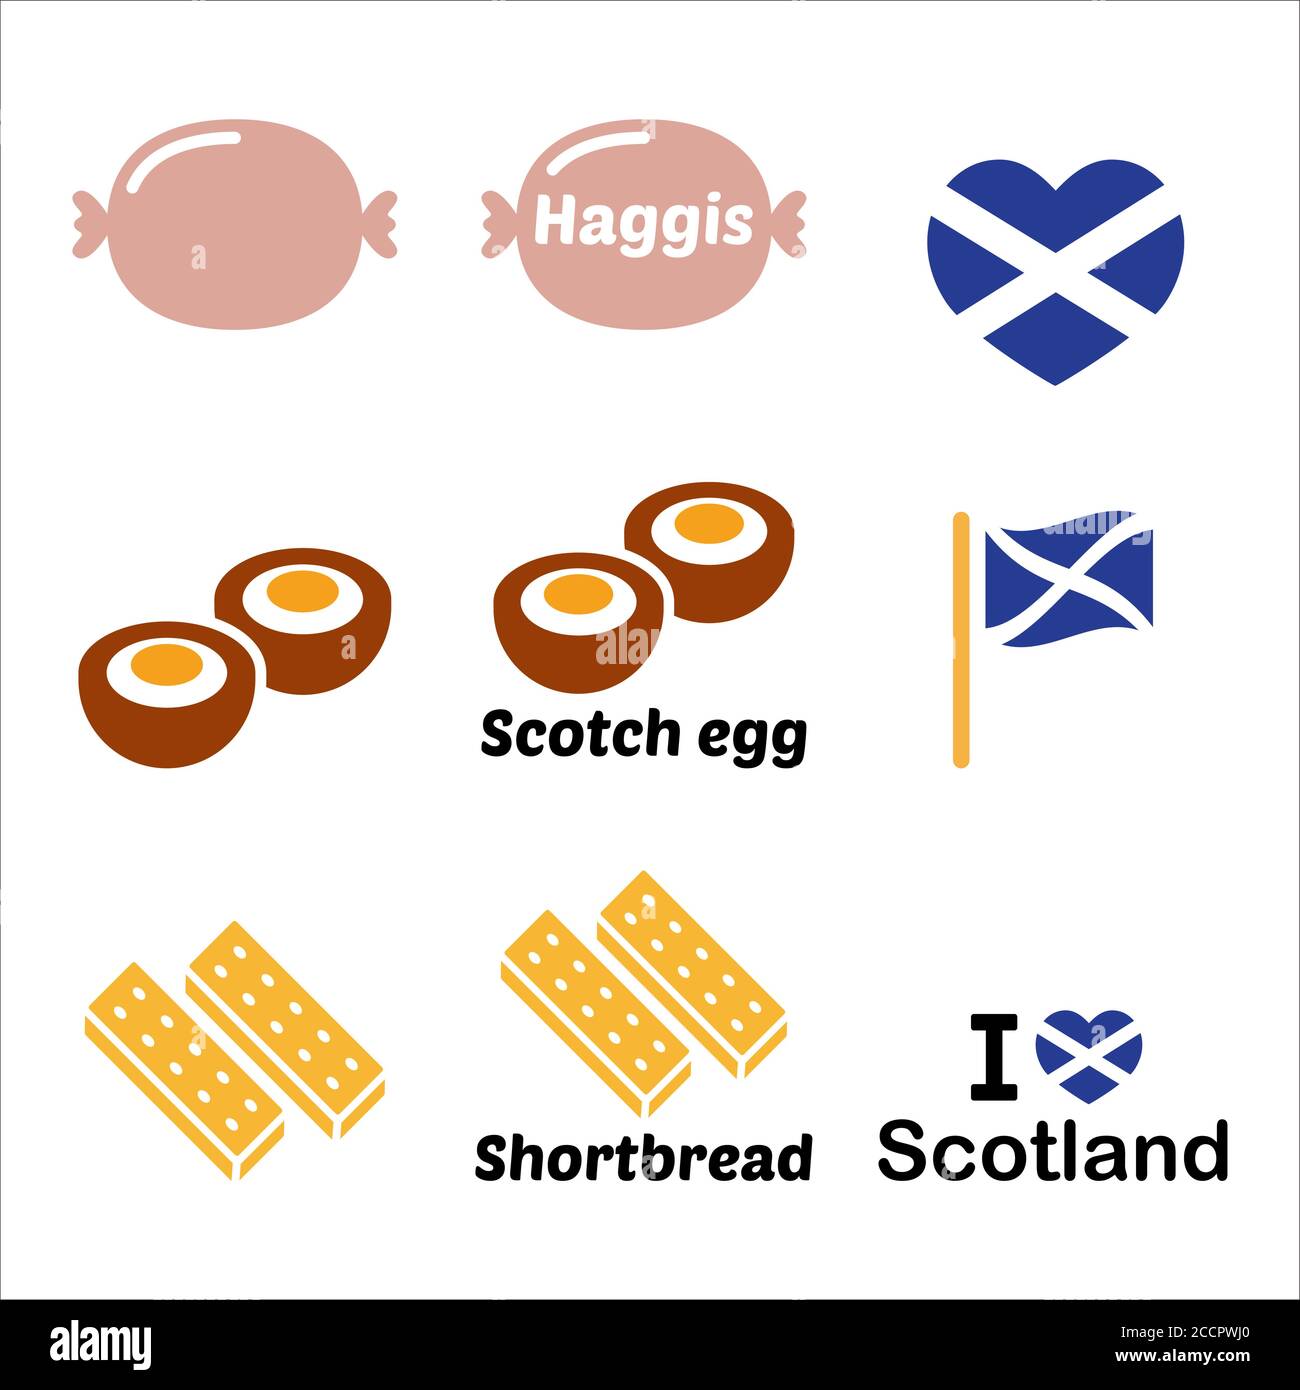 Scottish food - Haggis, Scotch egg, Shortbread icons set. Traditional meals design from Scotland Stock Vector